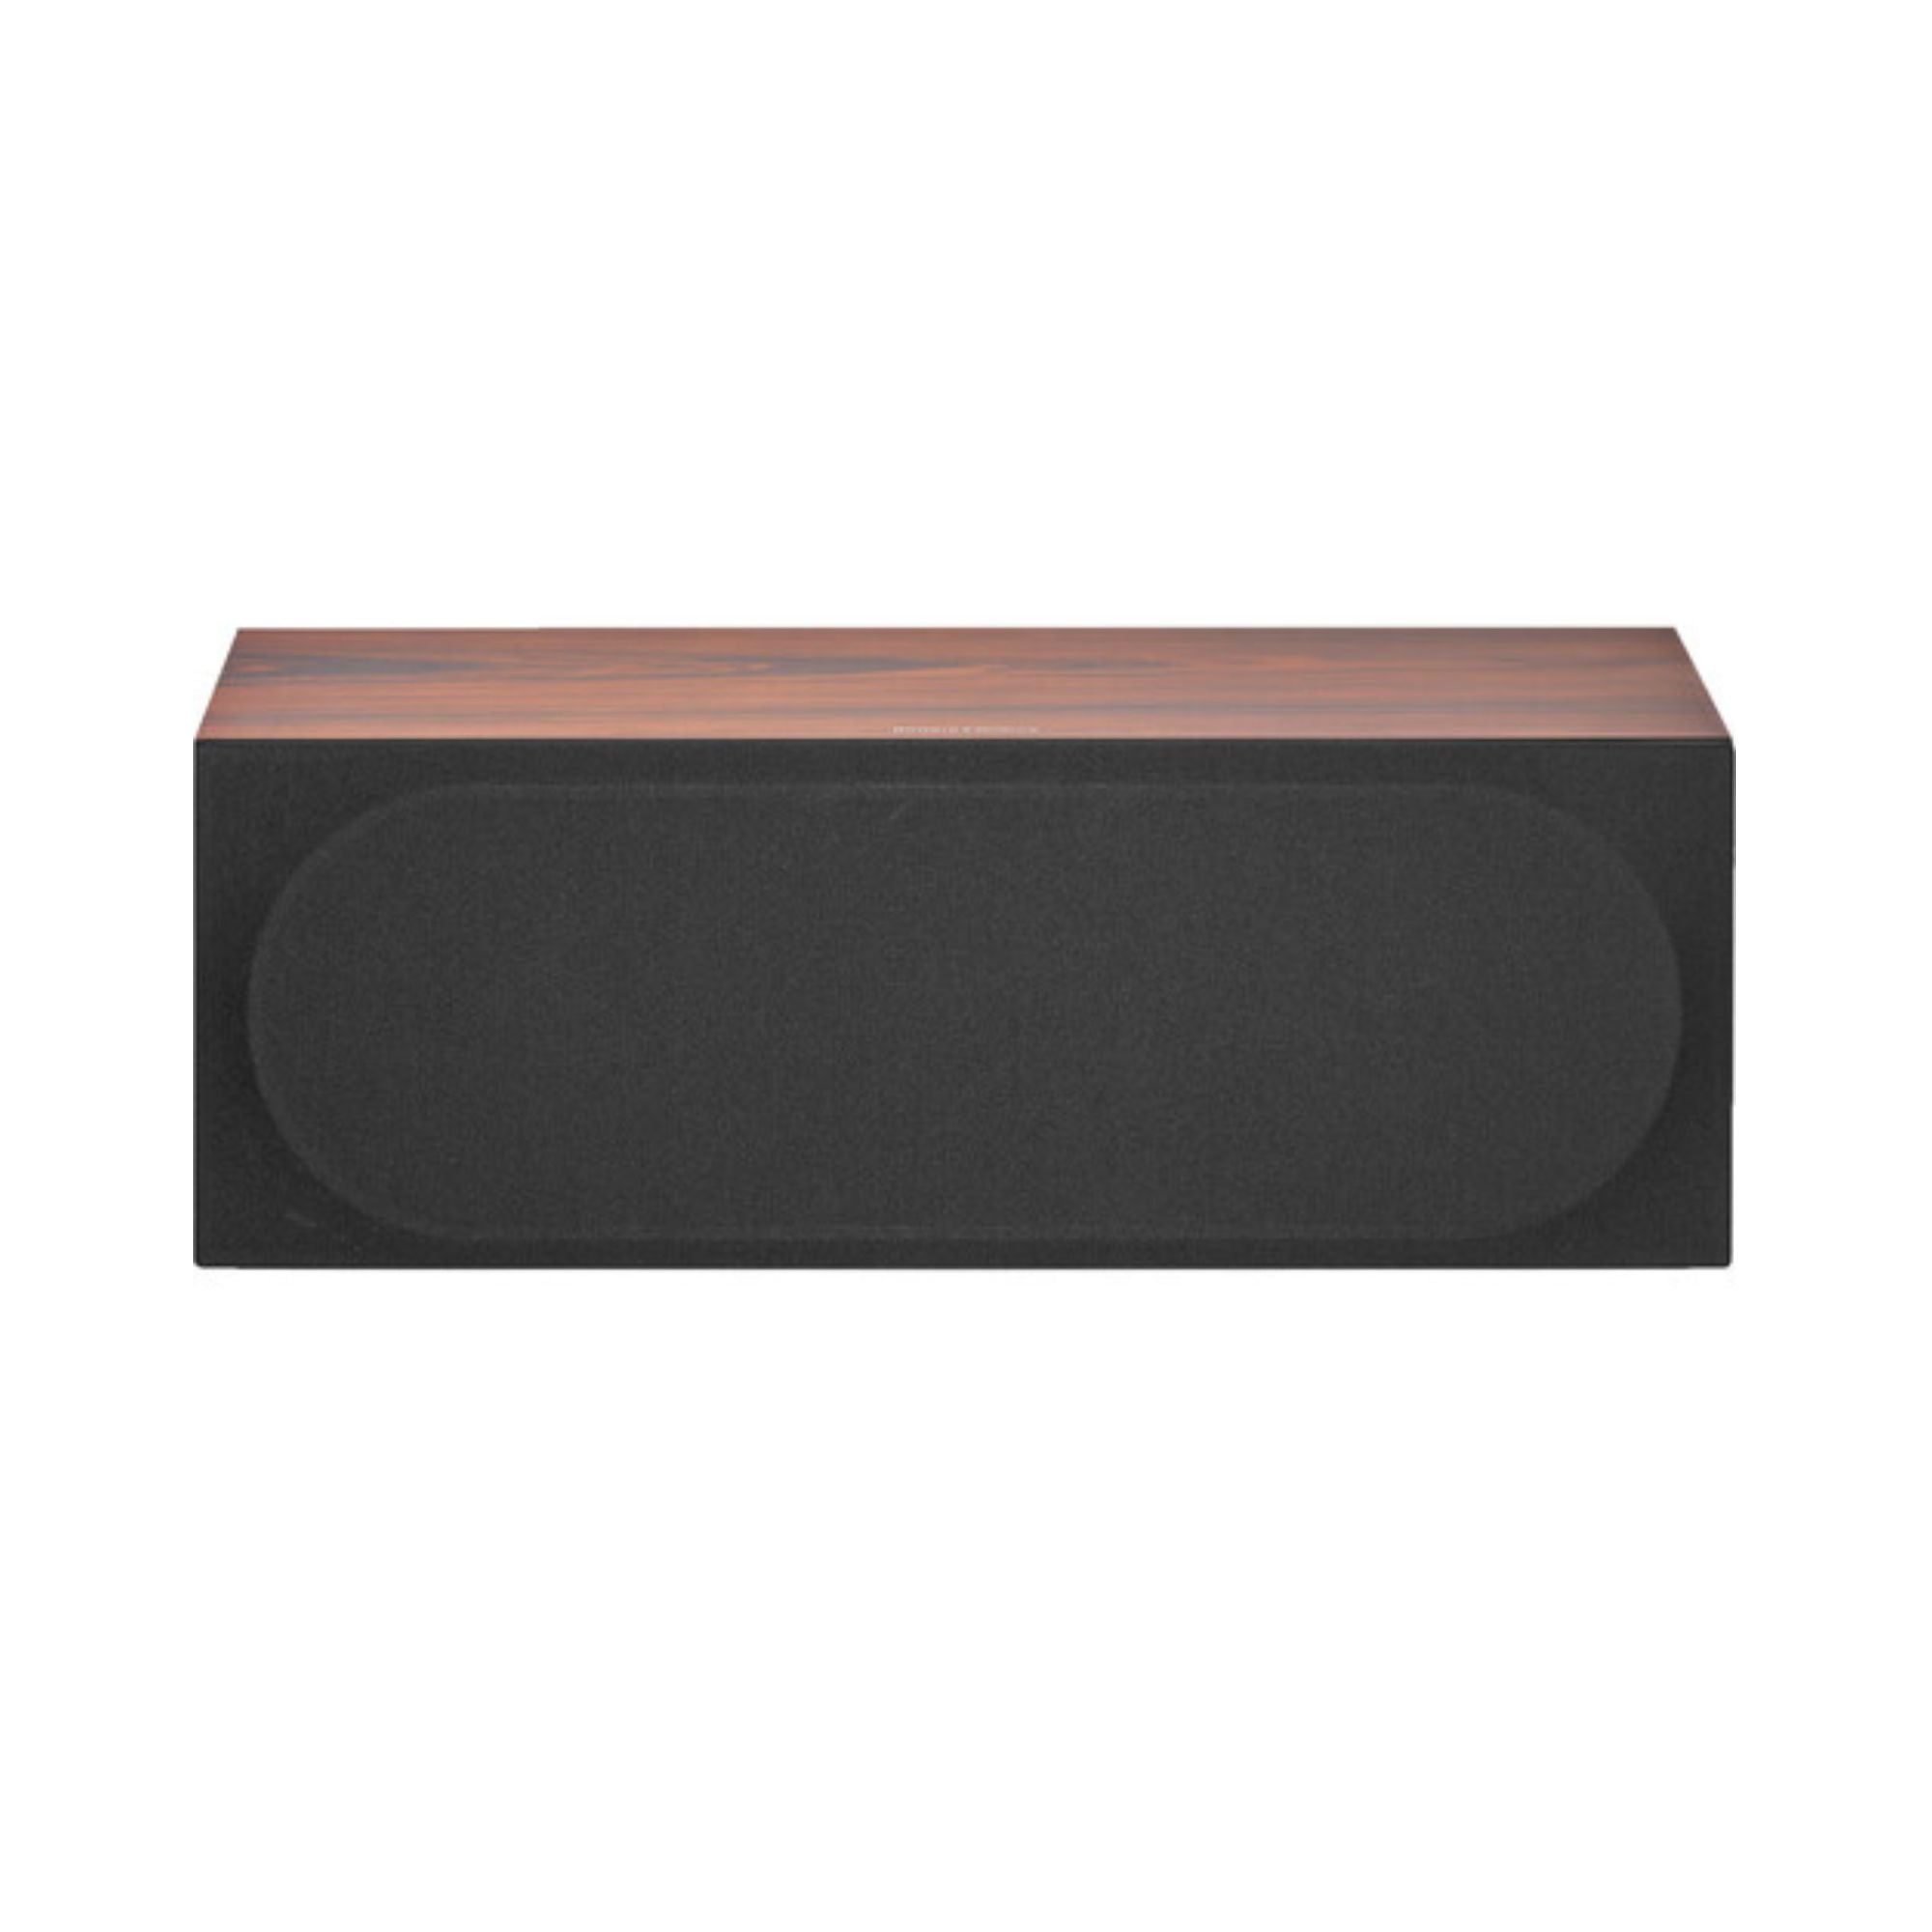 Bowers & Wilkins HTM72 S3 - 2-Way Center Channel Speaker, Bowers & Wilkins, Centre Channel Speaker - AVStore.in